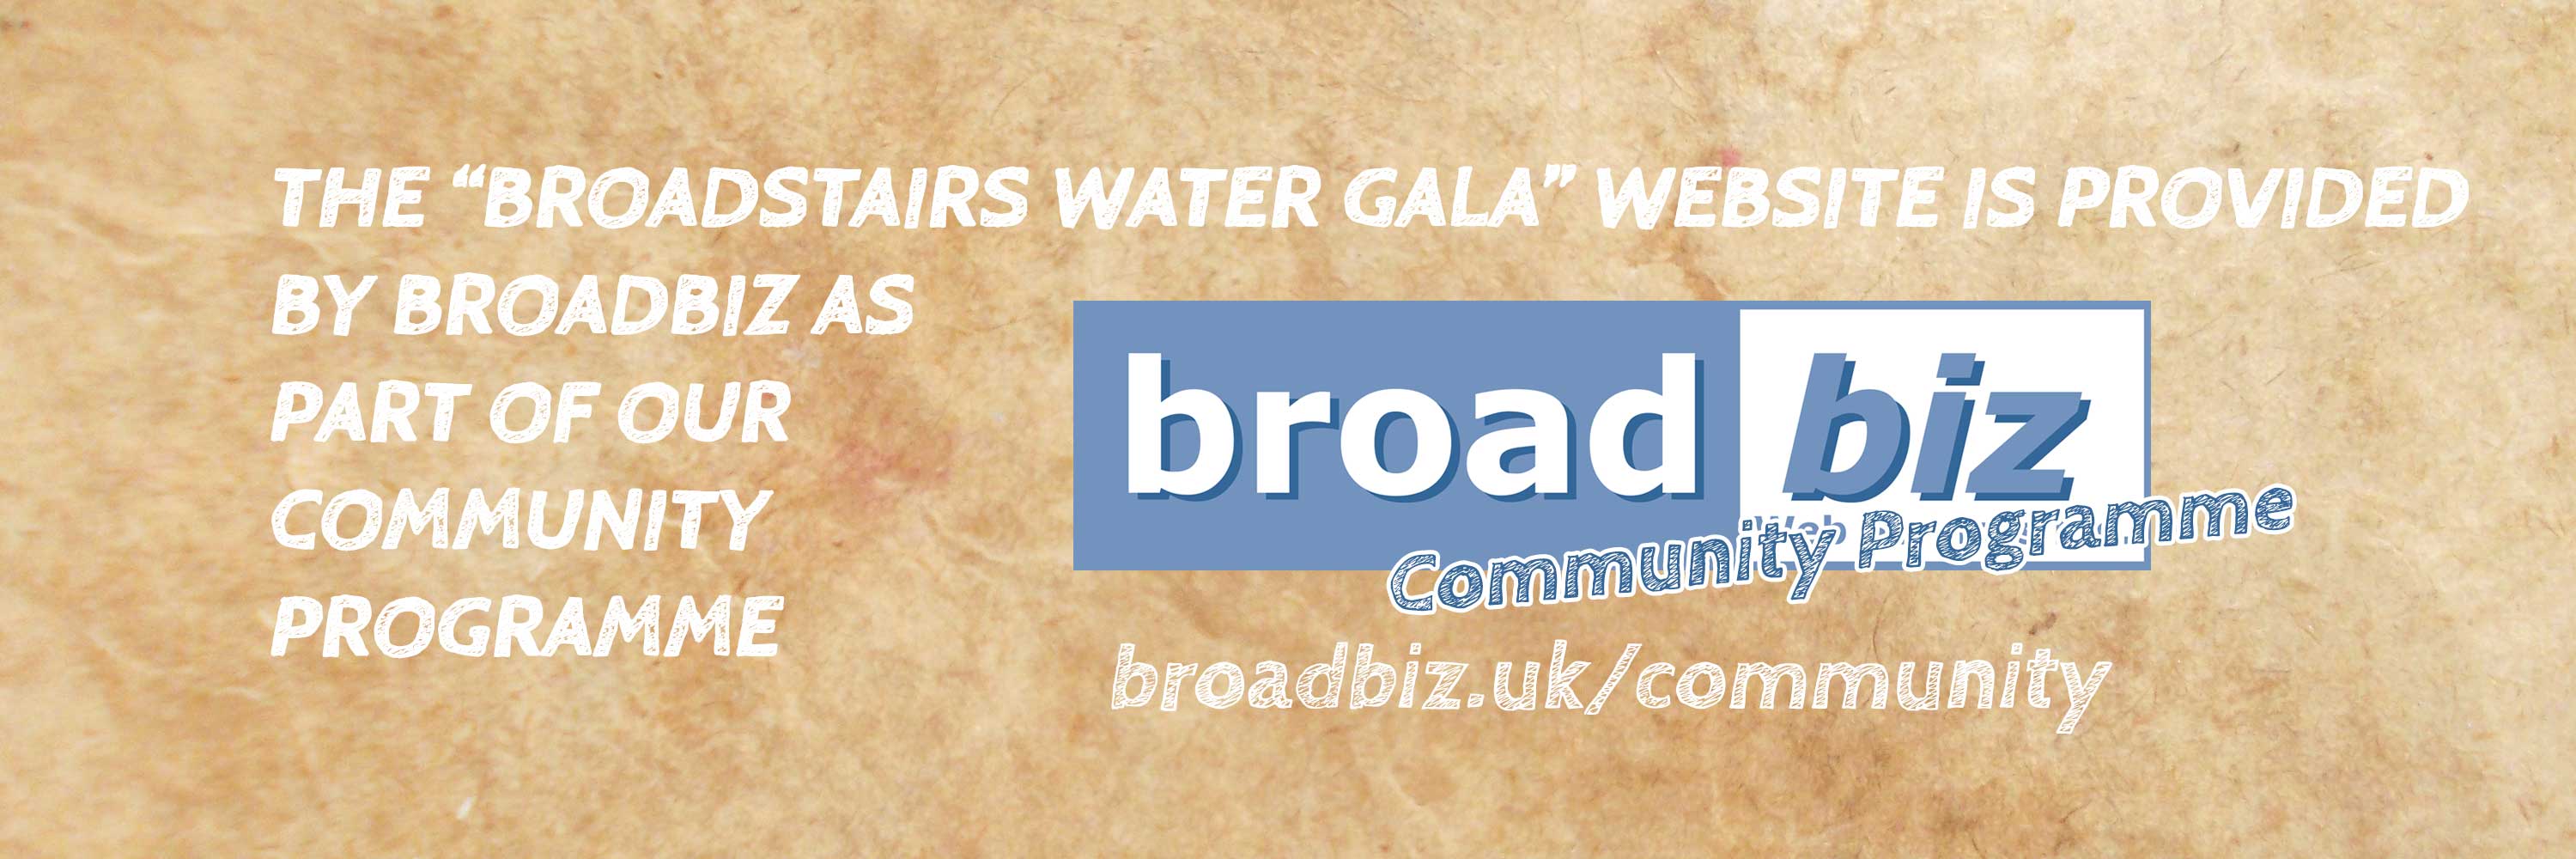 The Broadstairs Water Gala website is provided by Broadbiz as part of our Community Programme